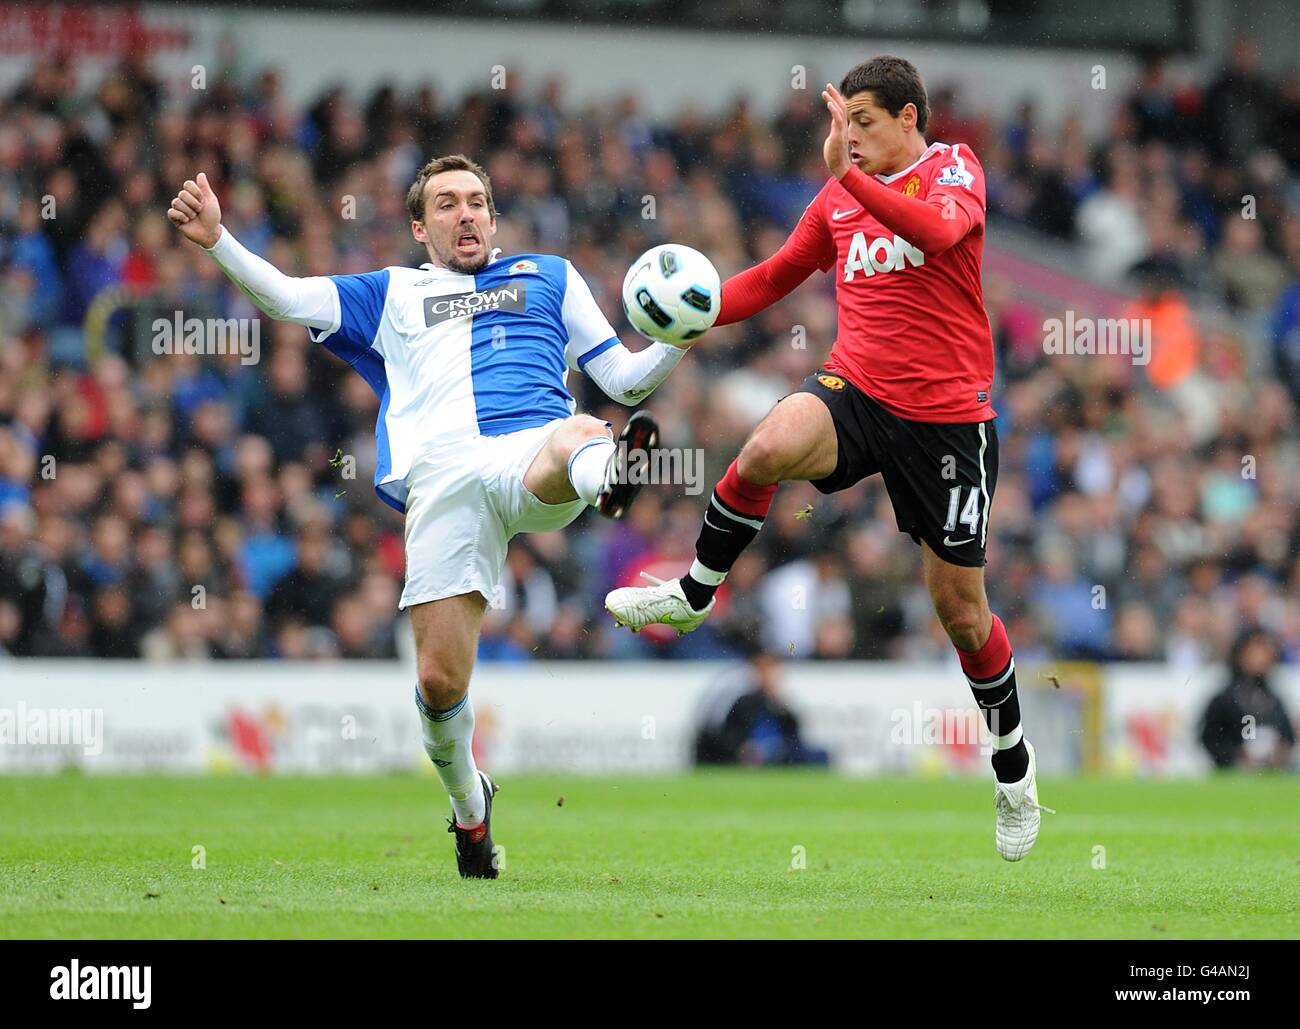 Soccer - Barclays Premier League - Blackburn Rovers v Manchester United - Ewood Park. Manchester United's Javier Hernandez (right) and Blackburn Rovers' Gael Givet battle for the ball Stock Photo